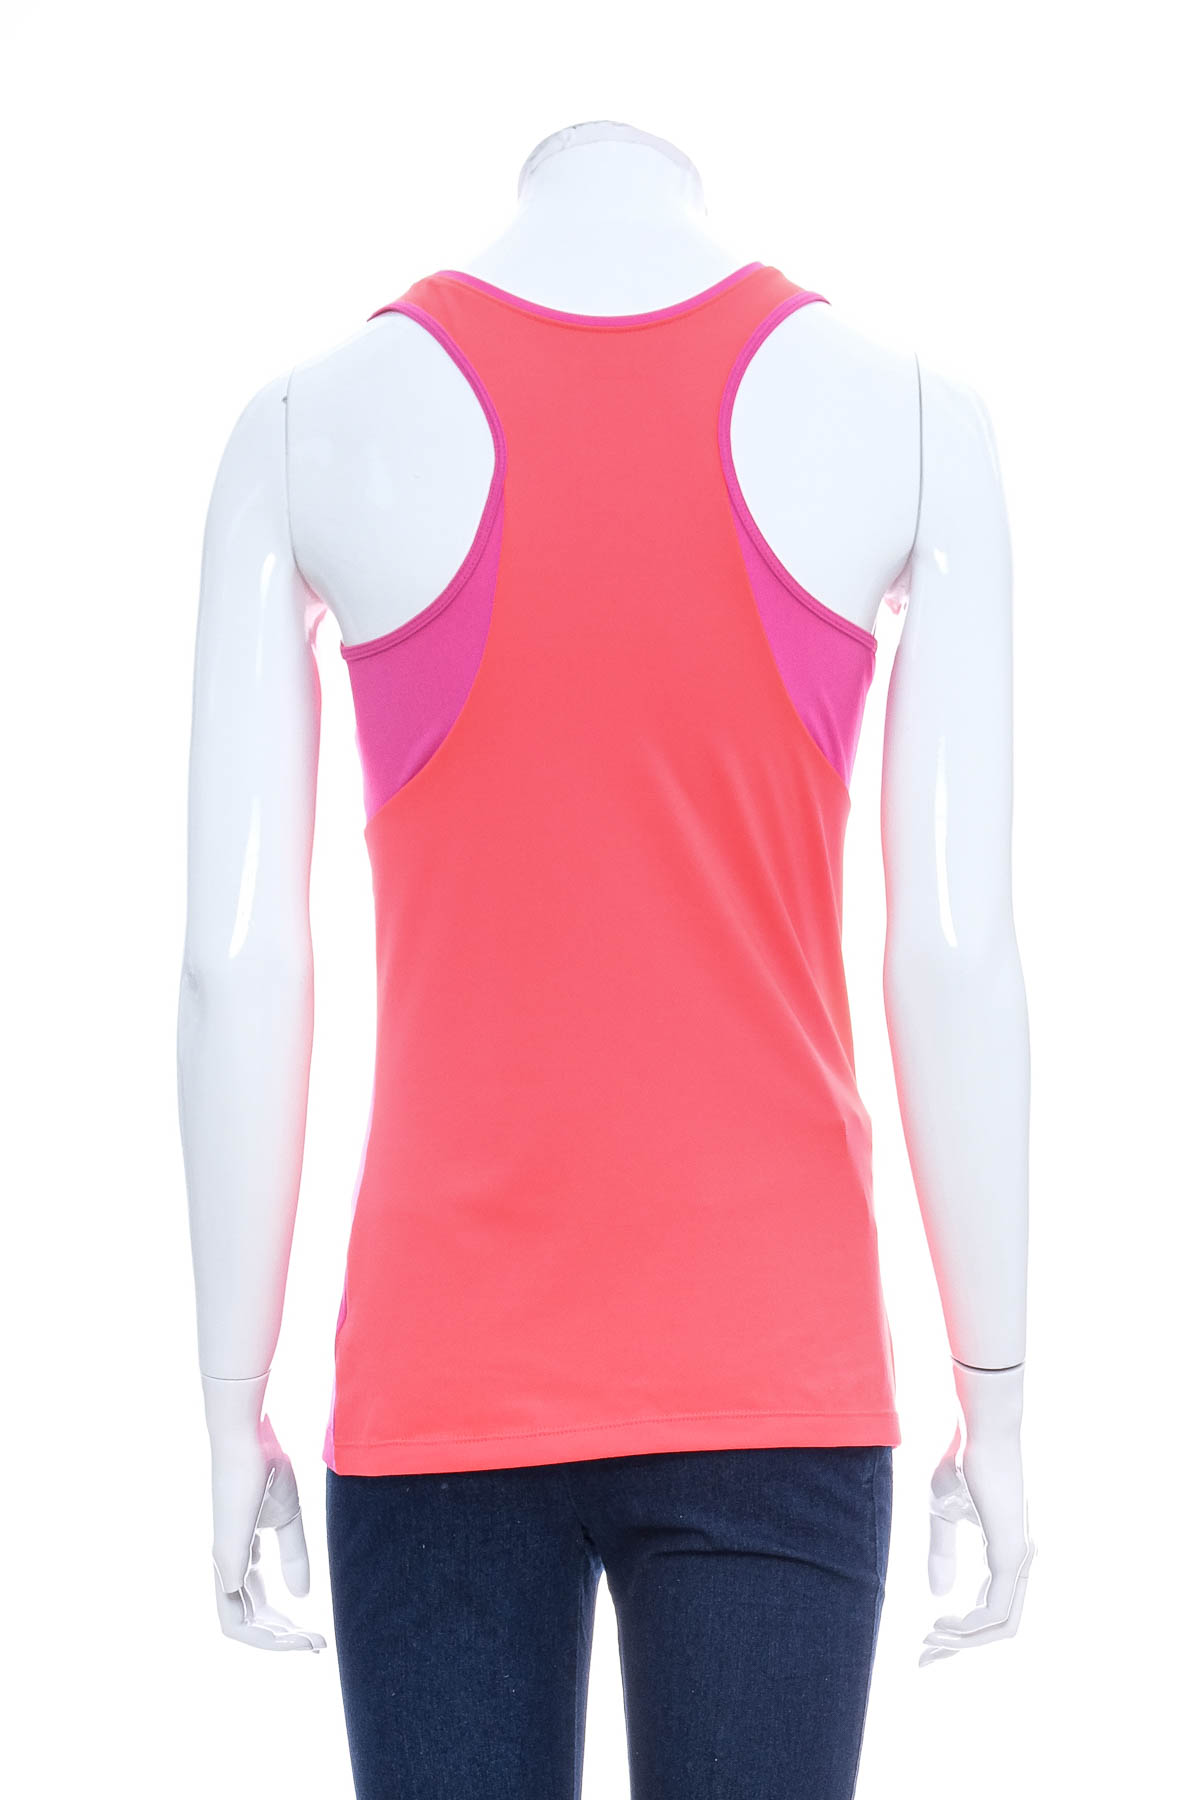 Women's top - Active by Tchibo - 1